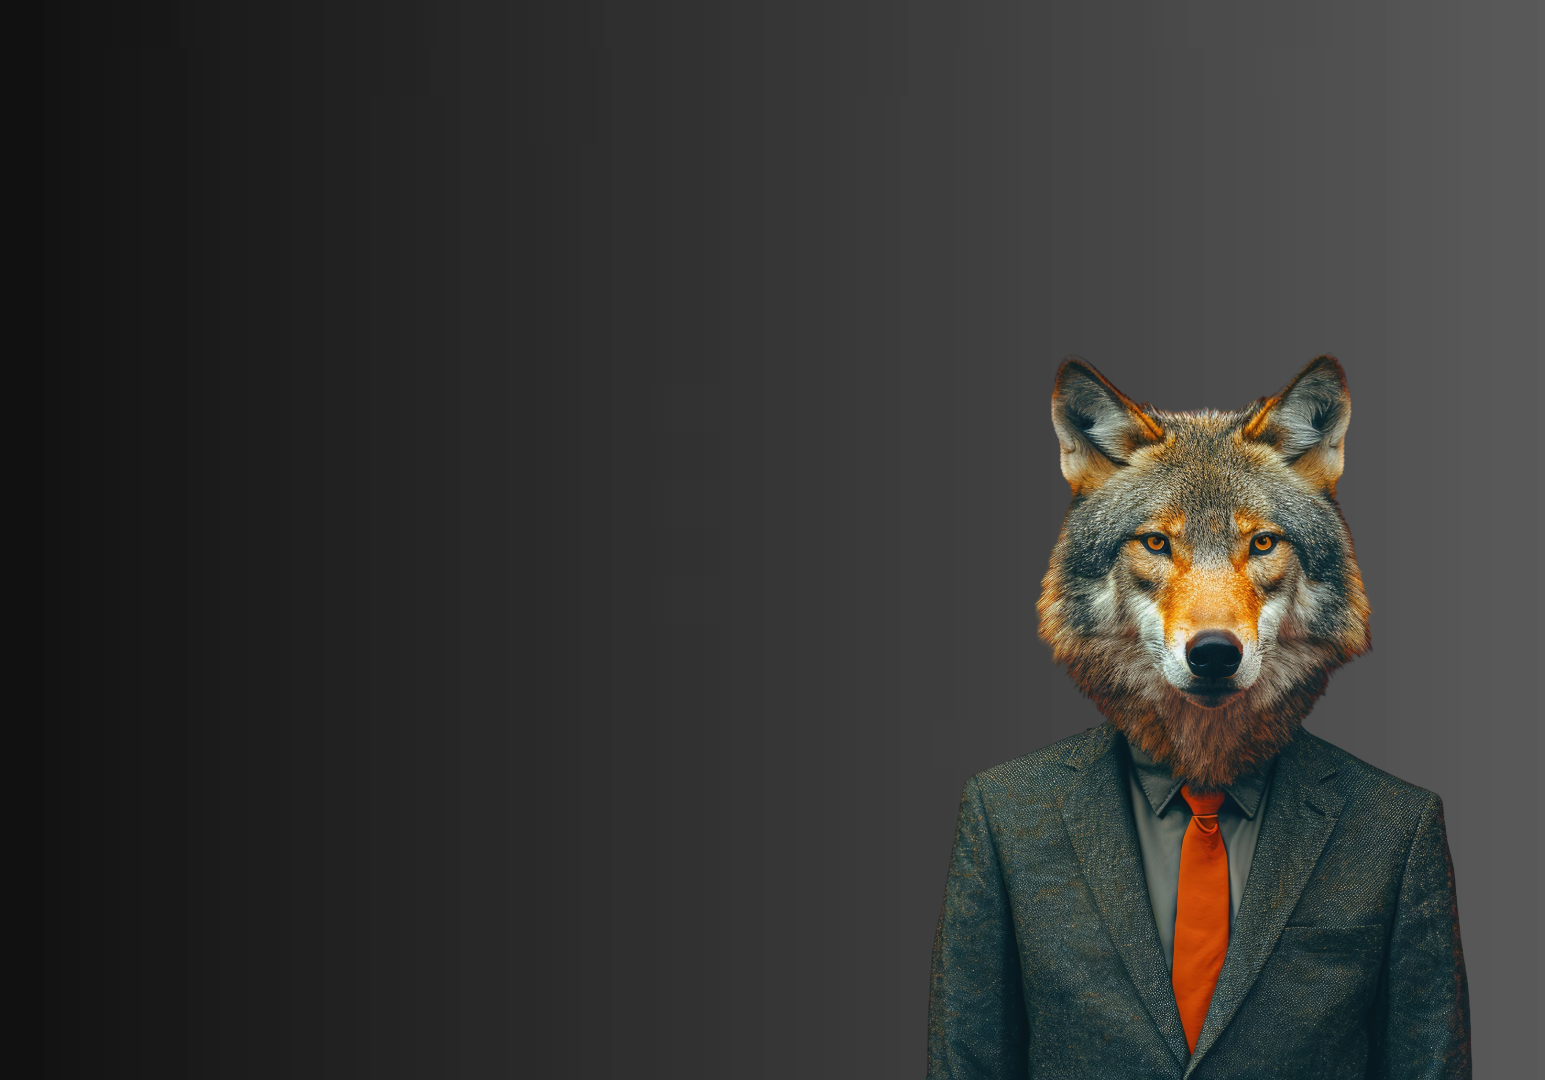 A wolf with a human head is wearing a suit and tie.